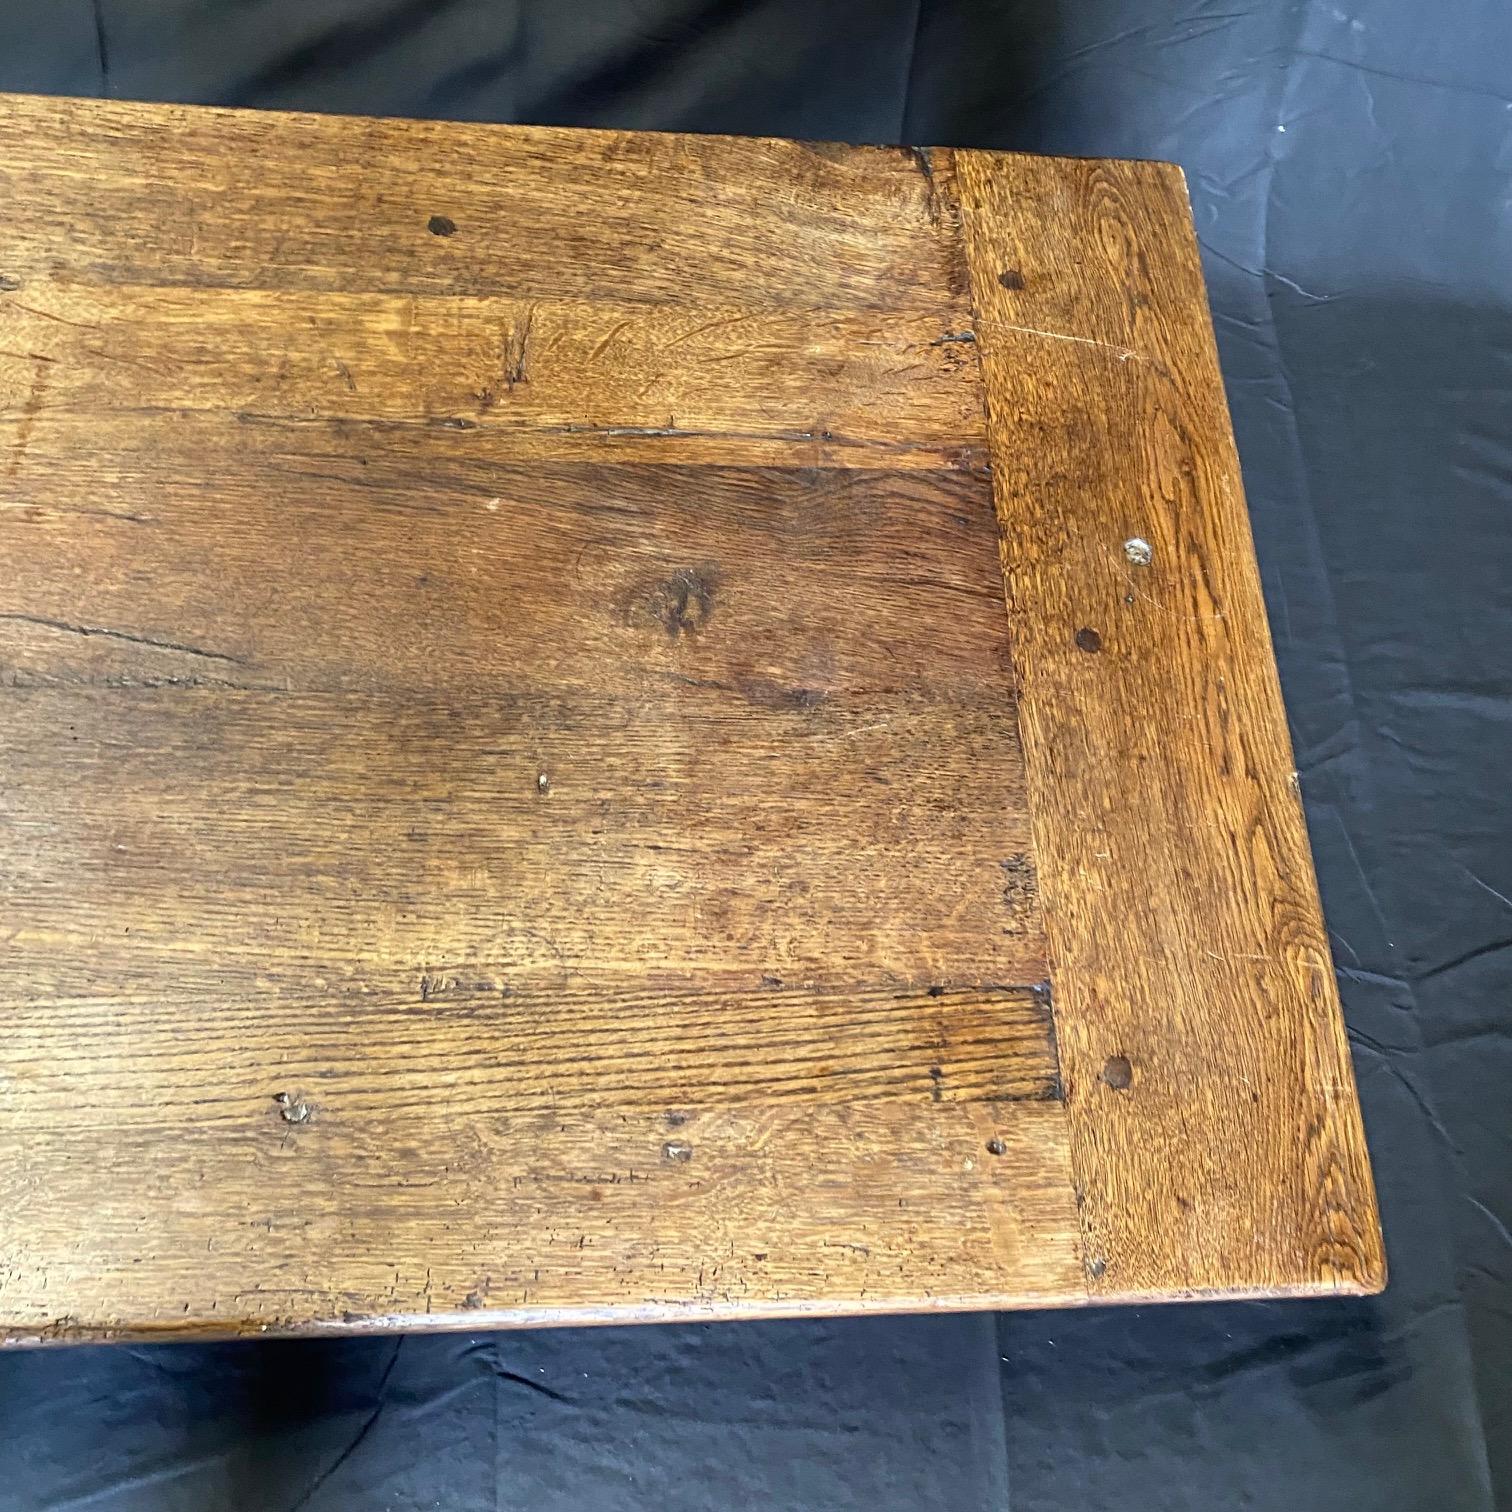 Antique French oak coffee table is a rich brown with gorgeous natural graining running along the plank top with breadboard ends. The legs are hand turned and connected with an H stretcher, and there are two spacious beautifully dovetailed drawers in